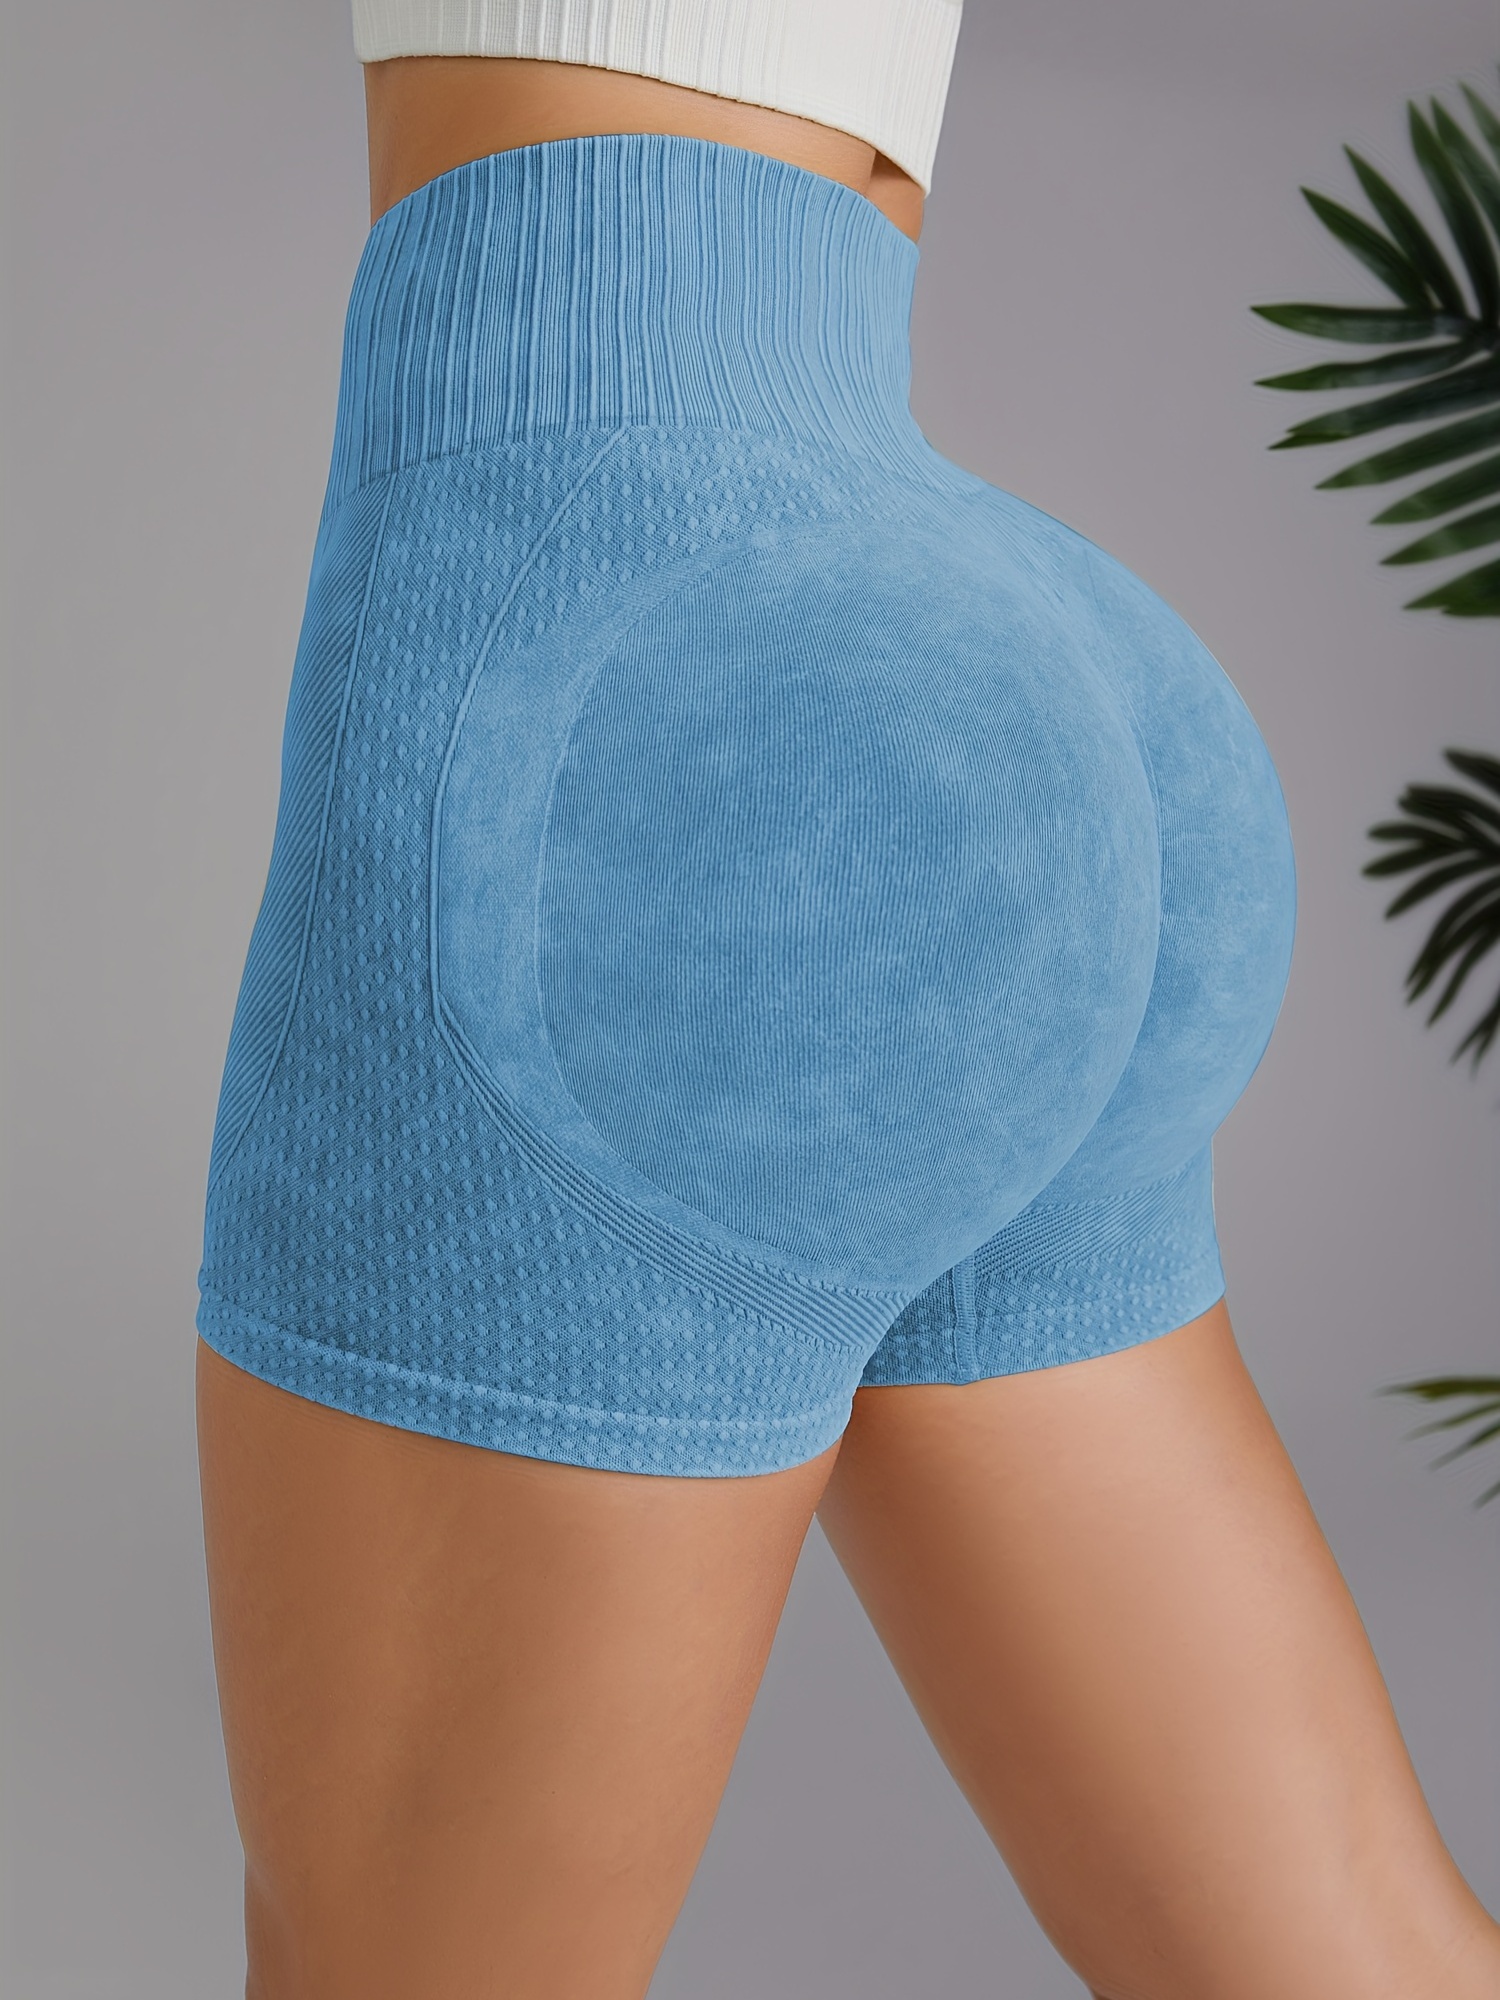 Comfy Butt Lifting Adjustable Shorts, Breathable Stretchy Solid